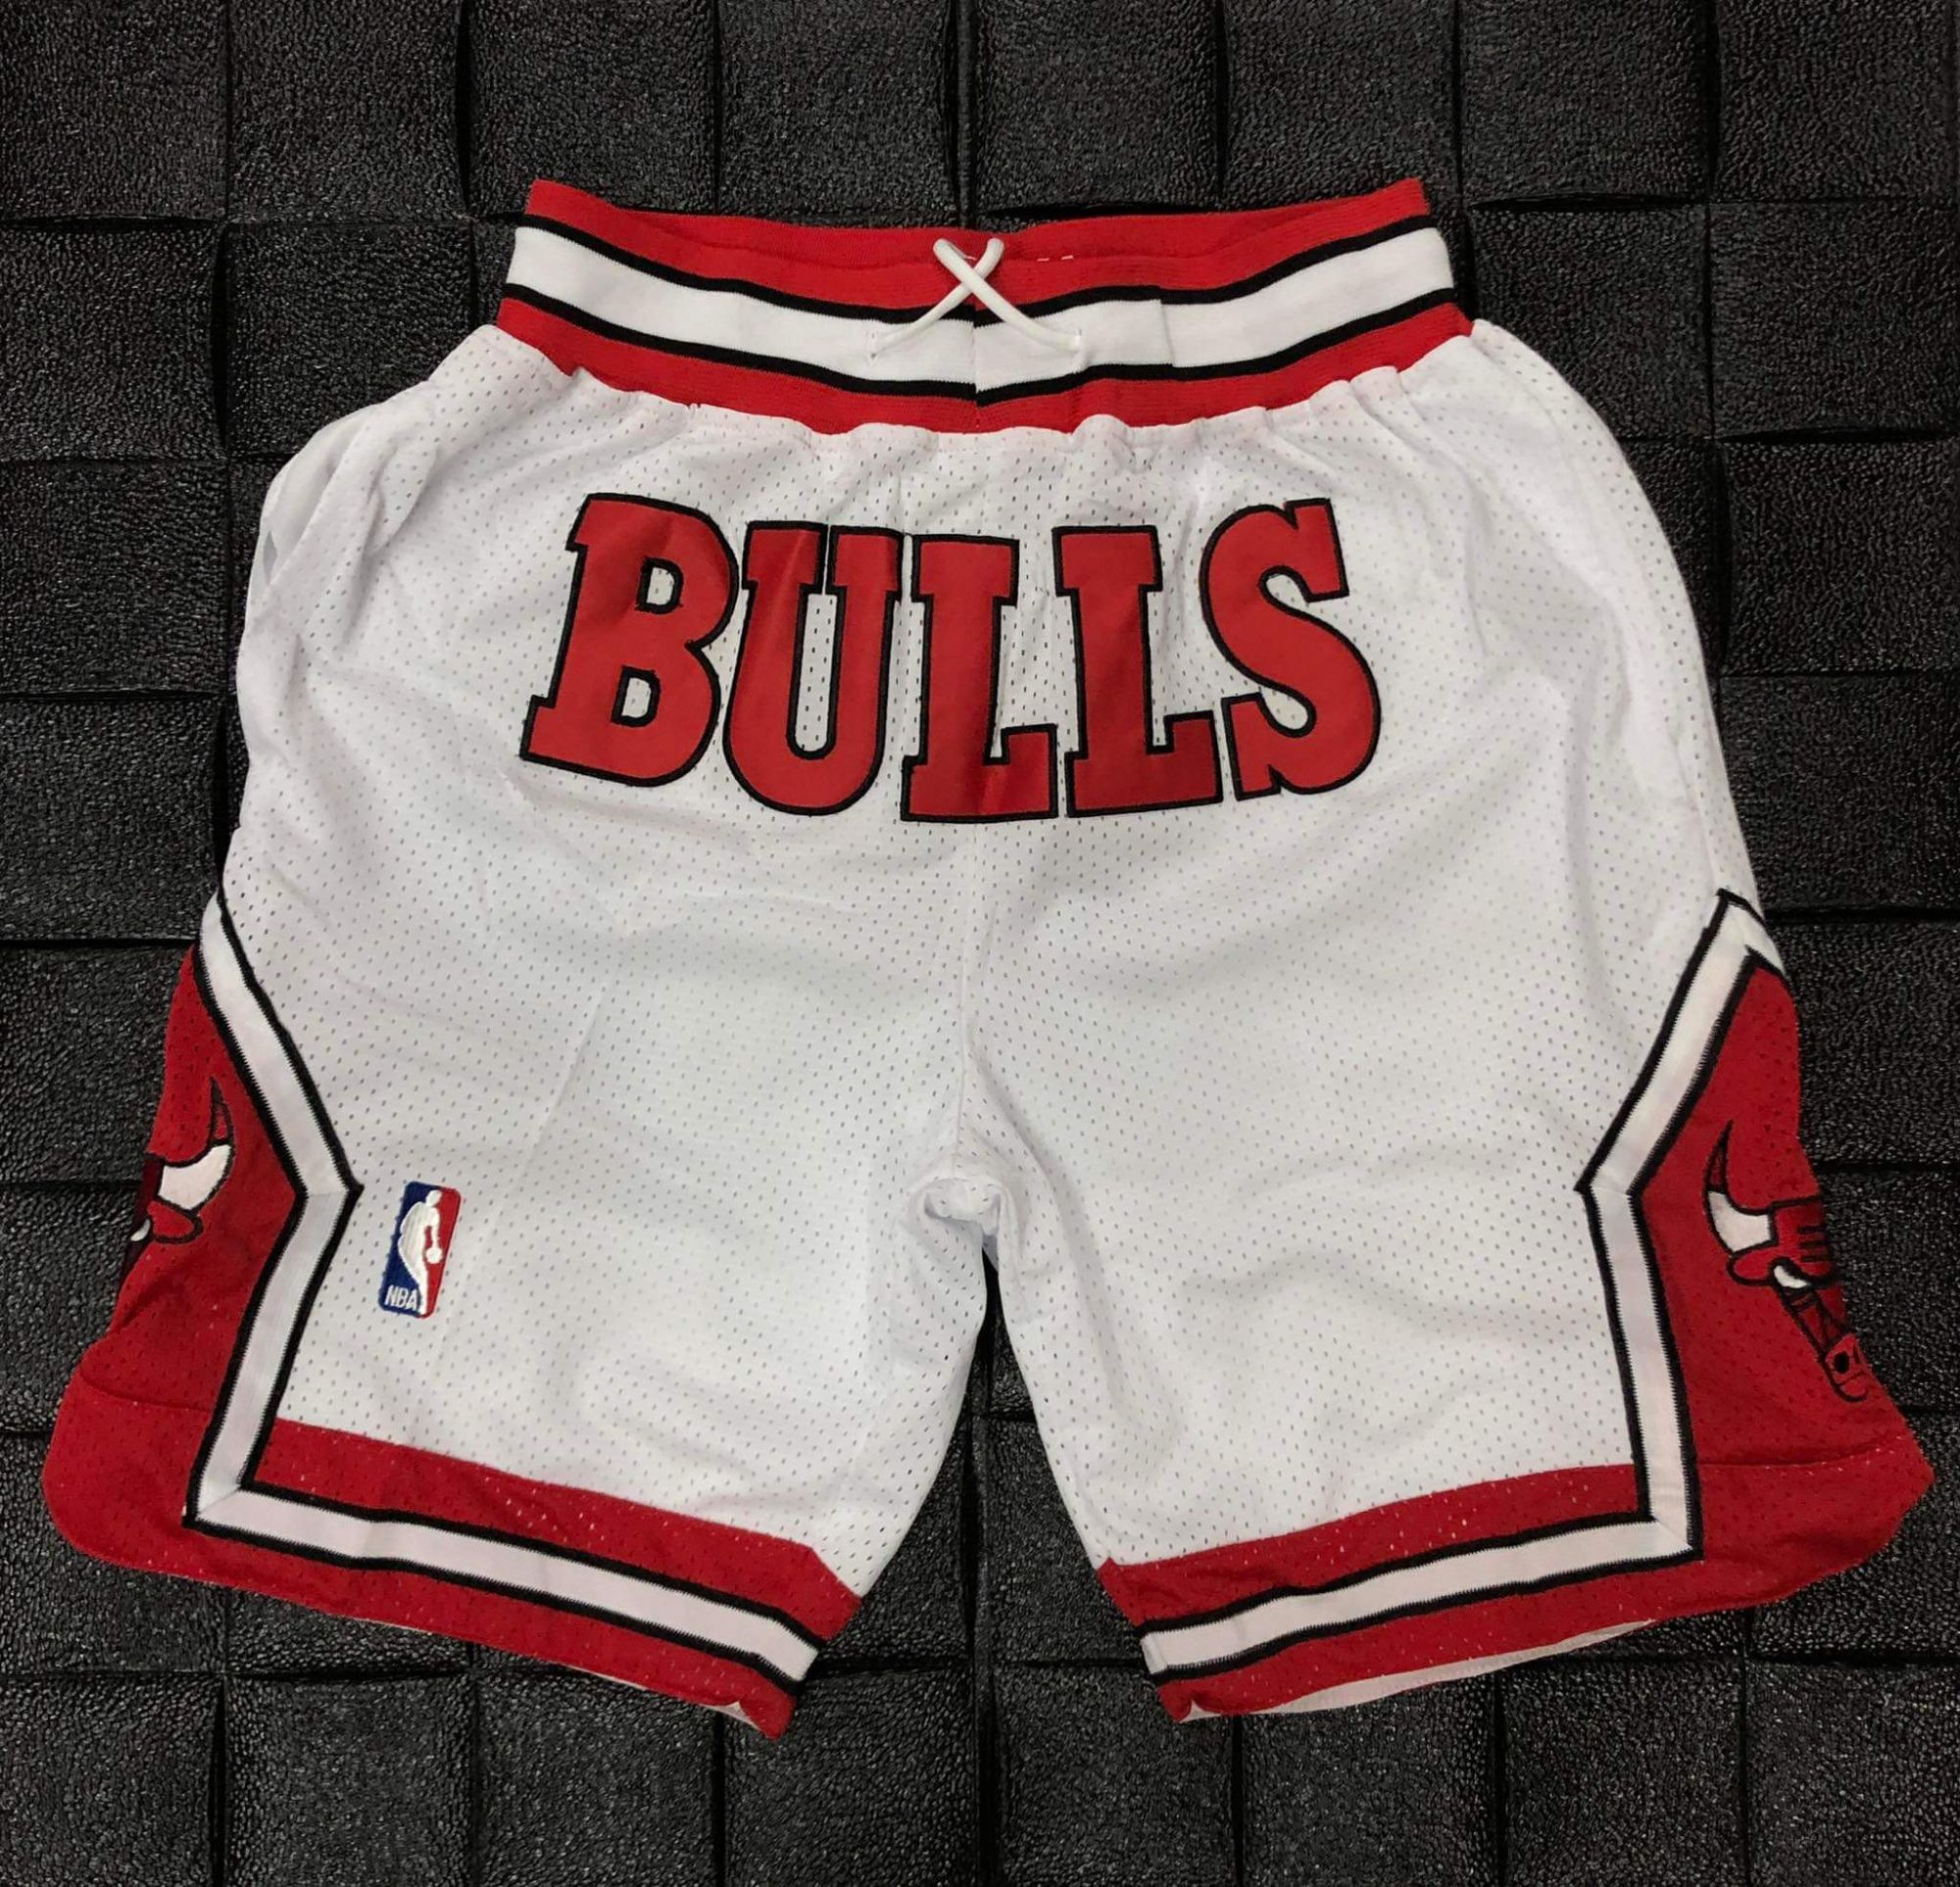 Shop New Chicago Bulls Basketball Short with great discounts and